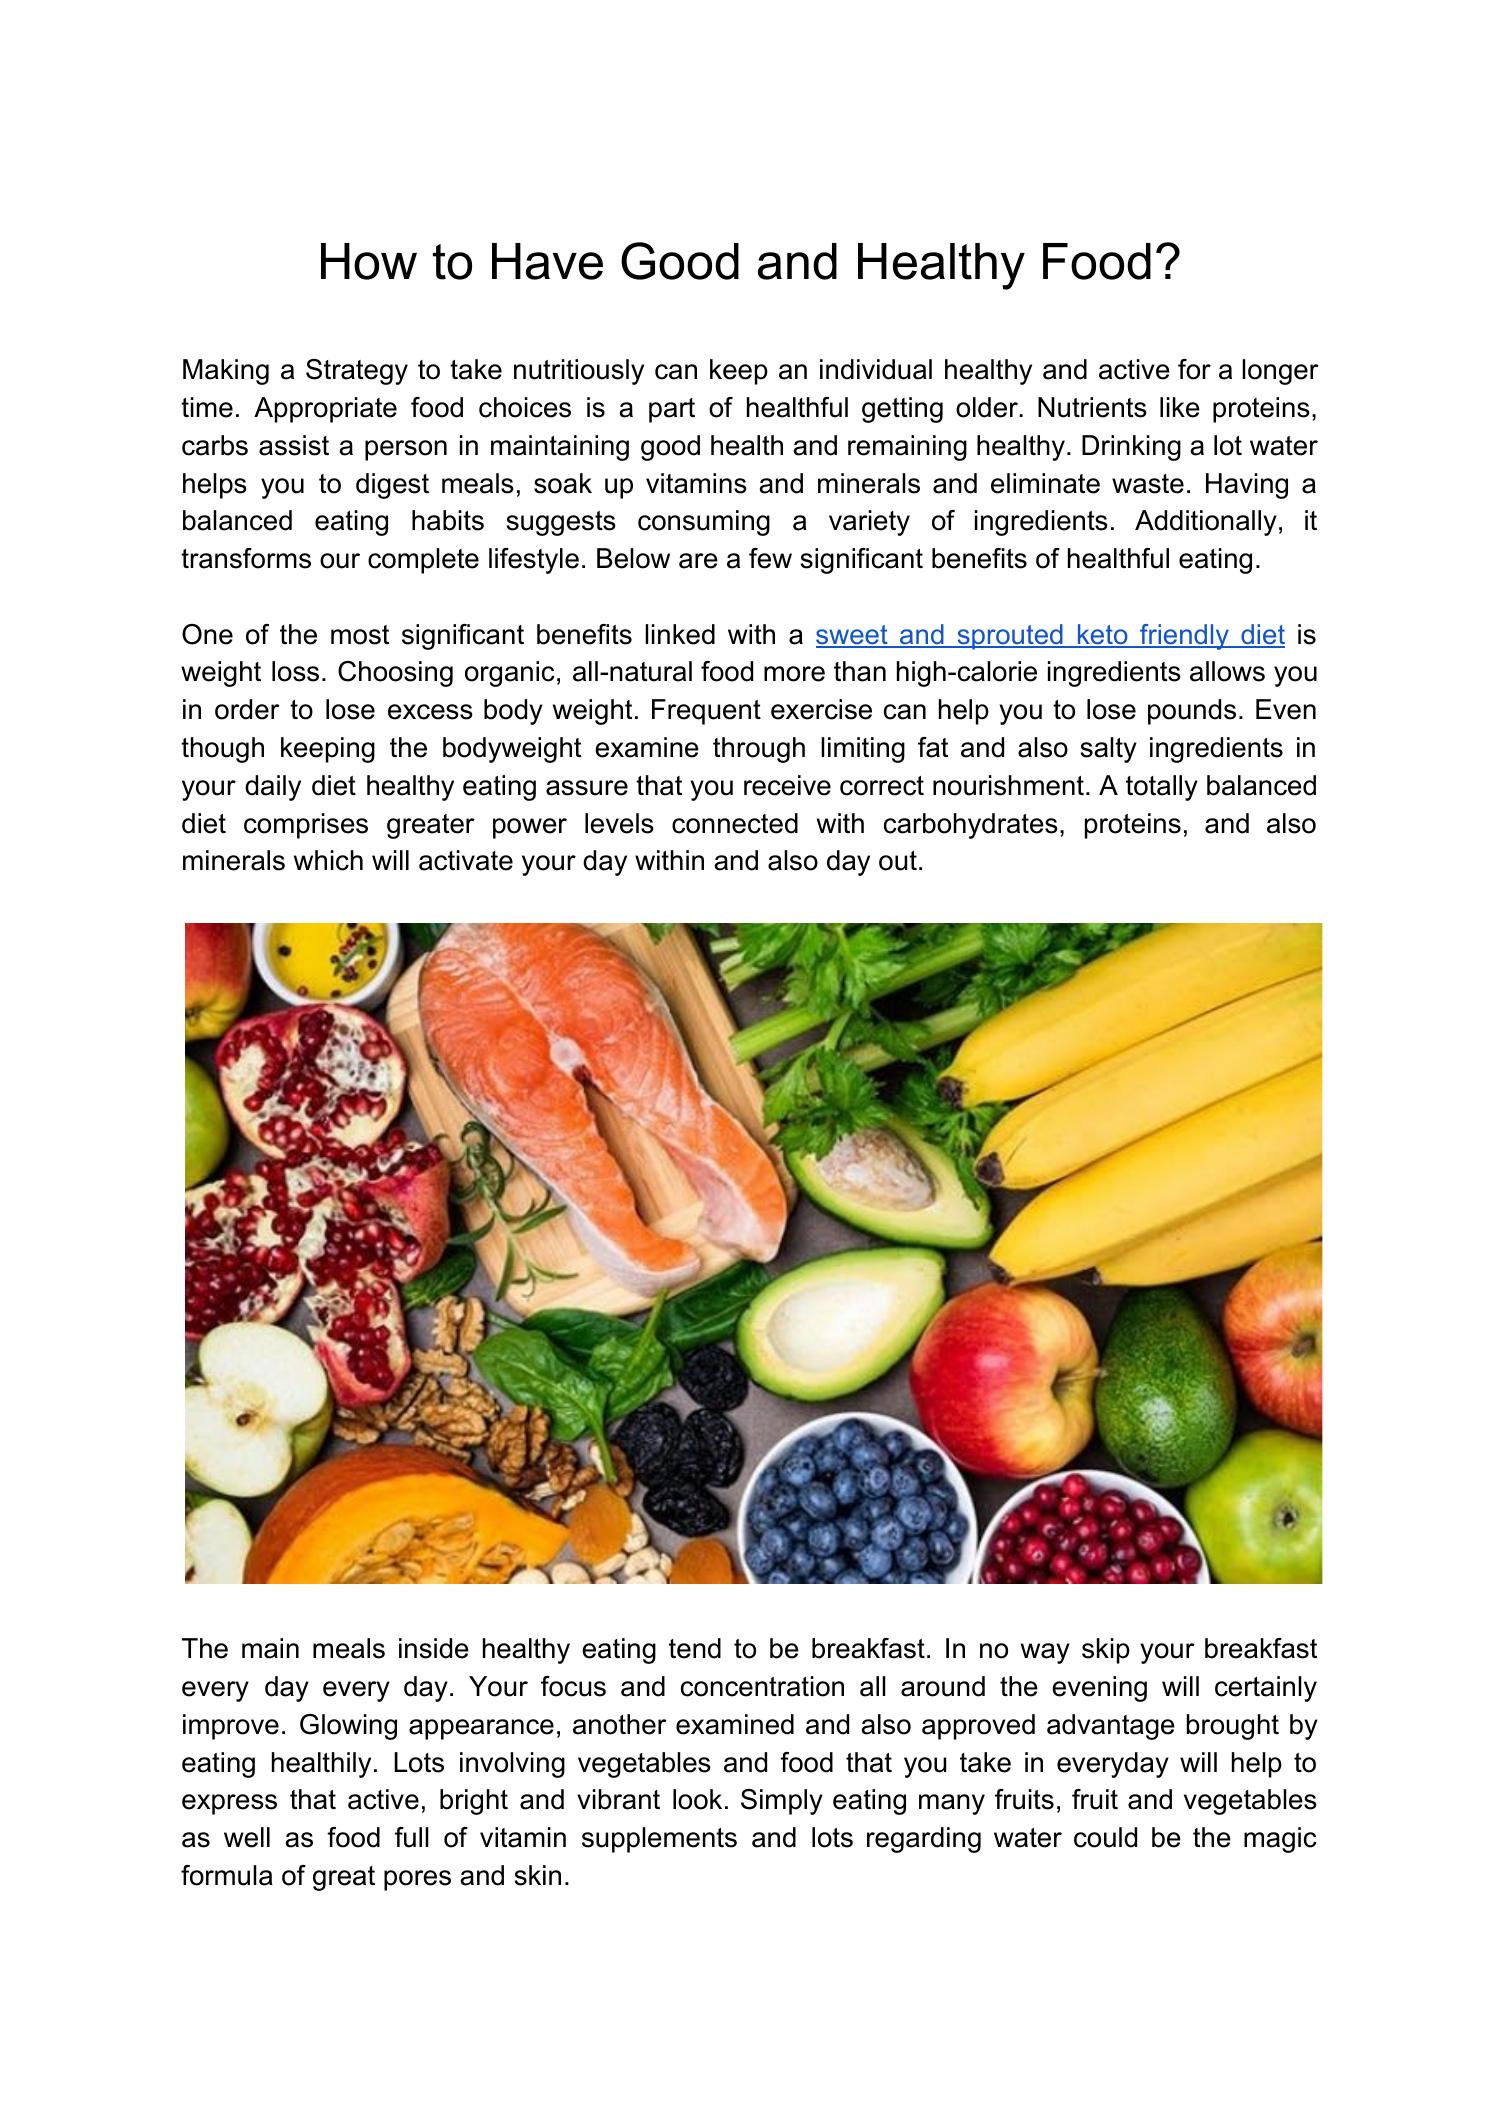 How to Have Good and Healthy Food.pdf | DocDroid